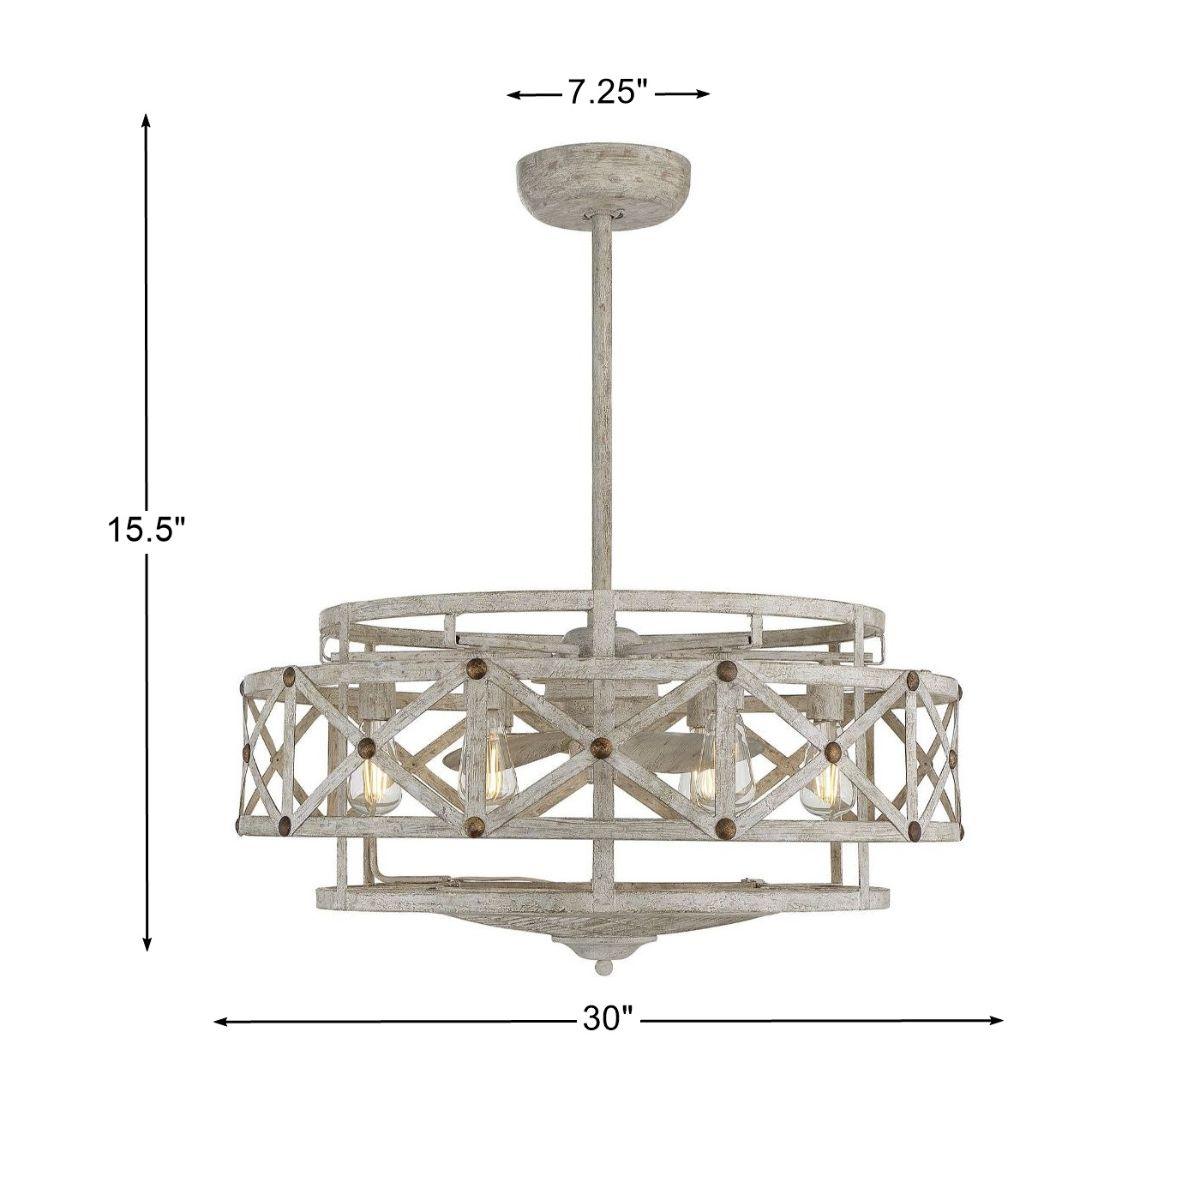 Colonade 30 Inch Chandelier Ceiling Fan With Light And Remote, Provence with Gold Accents Finish